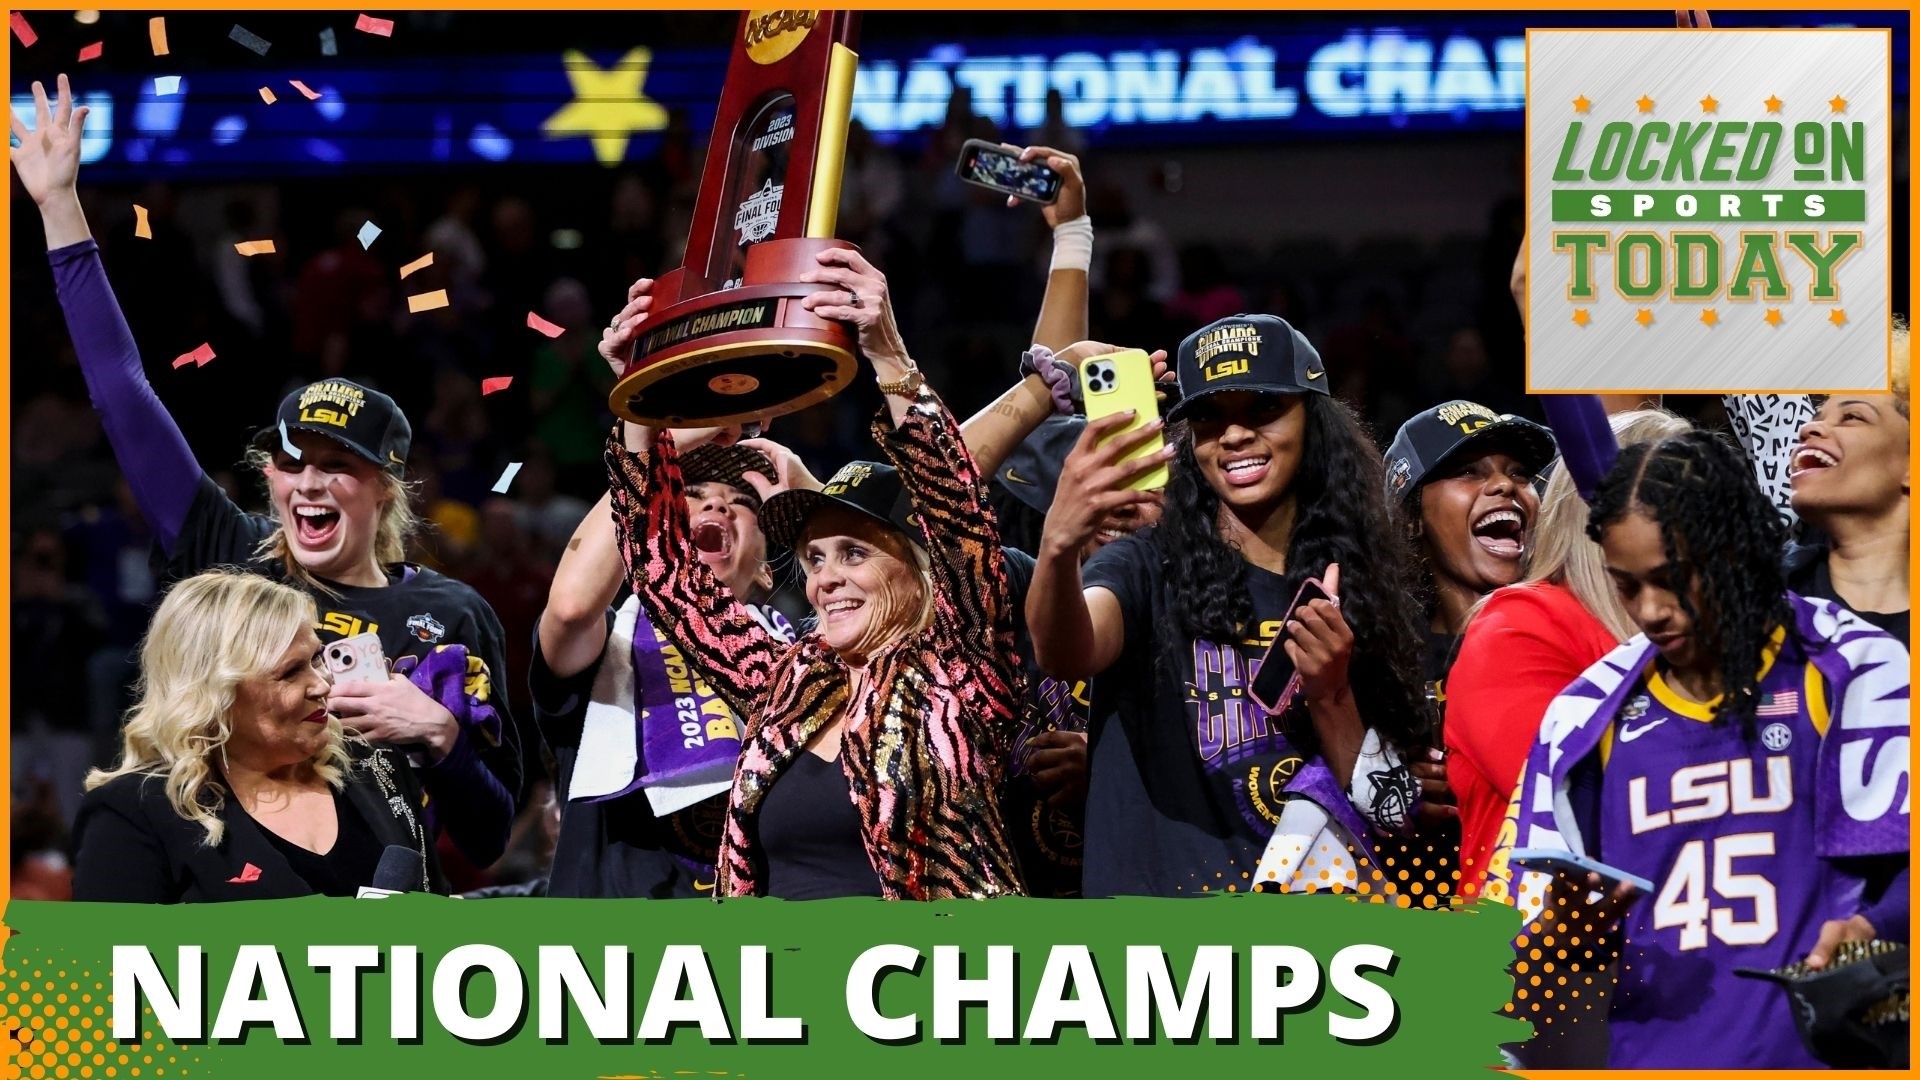 Discussing the day's top sports stories from LSU winning the title in women's NCAA basketball to the men's national title championship game that no one expected.